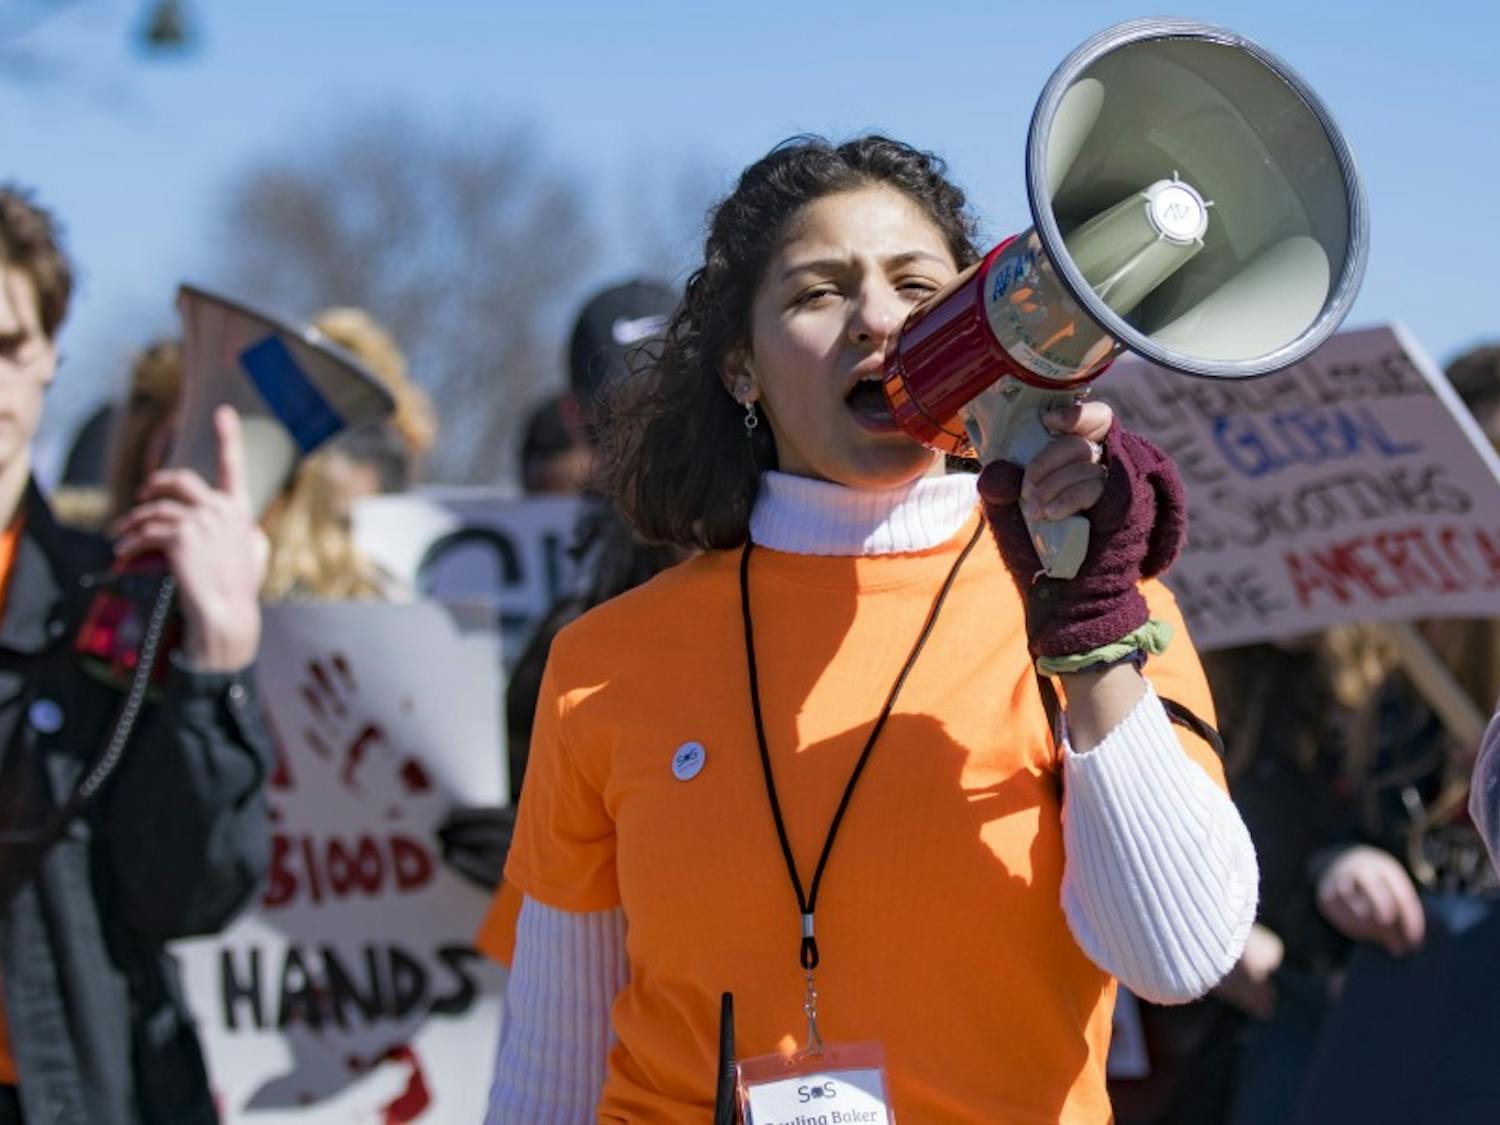 The Madison chapter of Moms Demand Action for Gun Sense in America met Tuesday to discuss next steps in advocating for stricter gun laws.